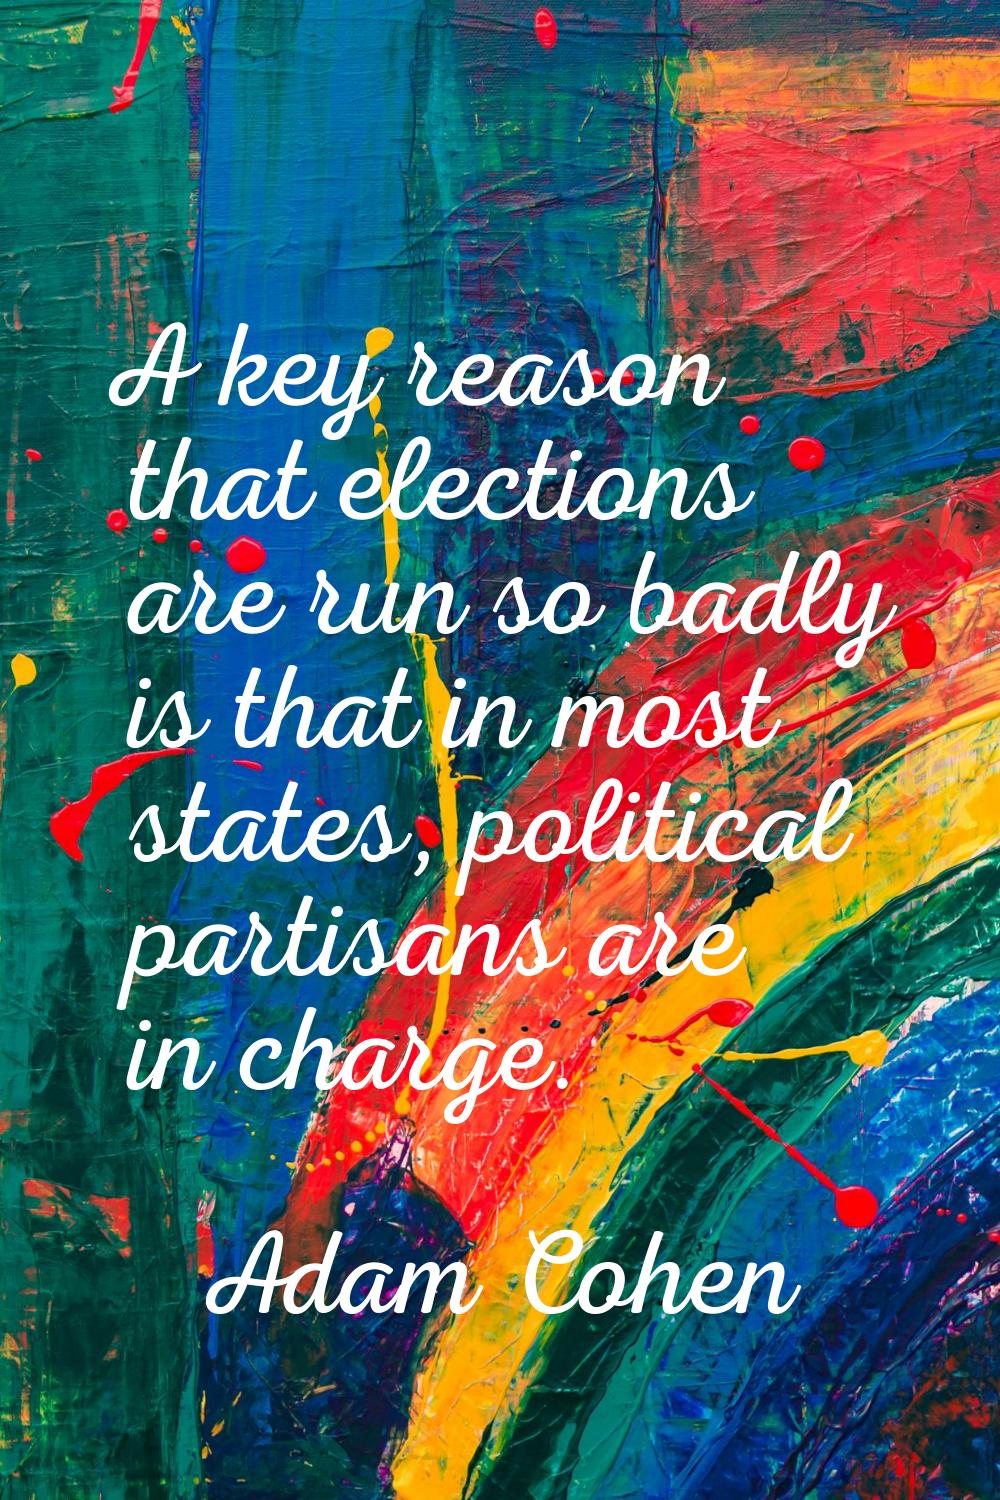 A key reason that elections are run so badly is that in most states, political partisans are in cha